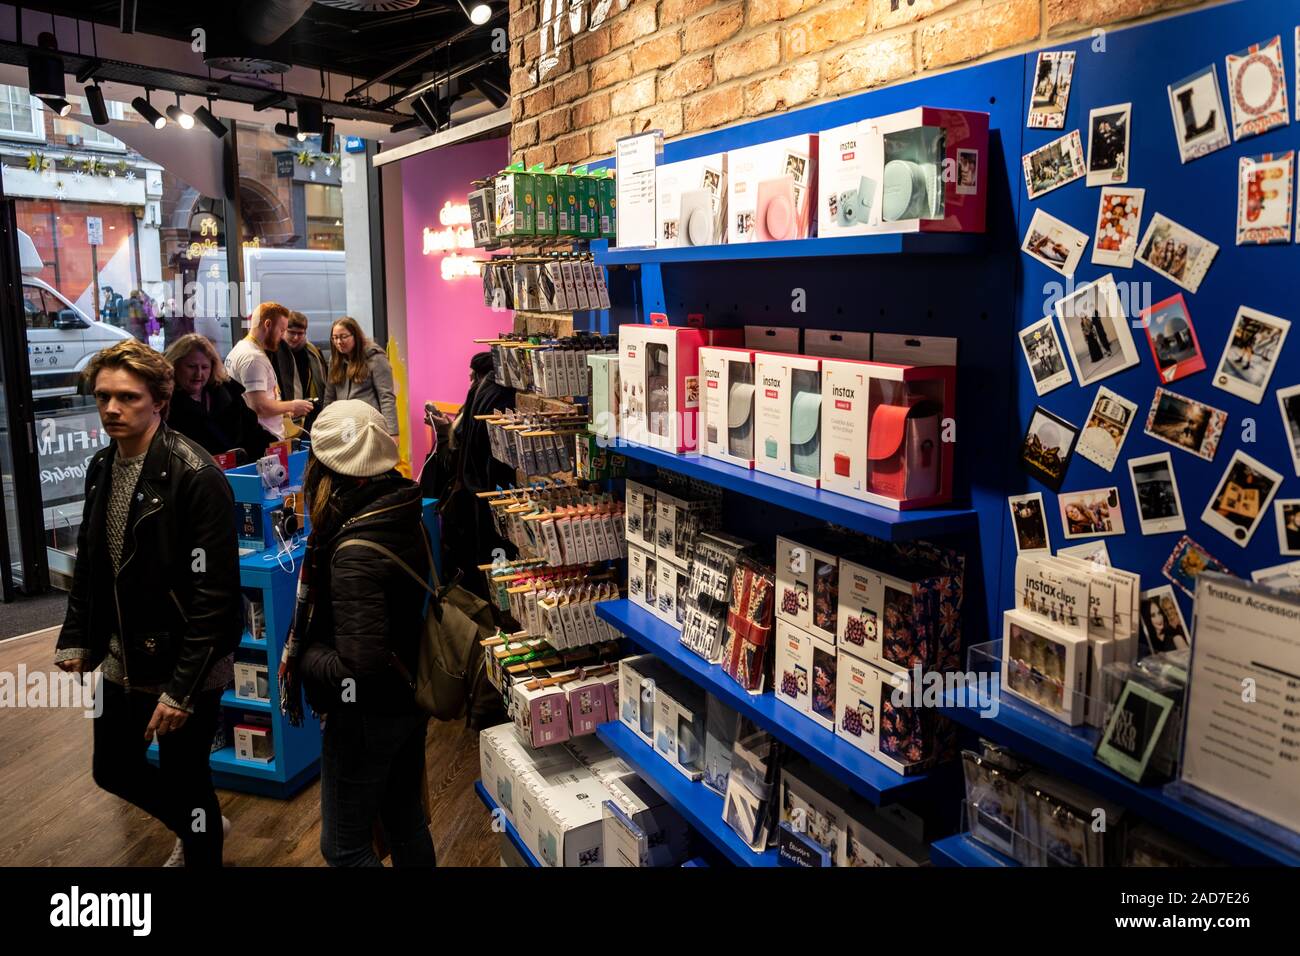 Fujifilm House of Photography public launch event at Covent Garden, London. Stock Photo